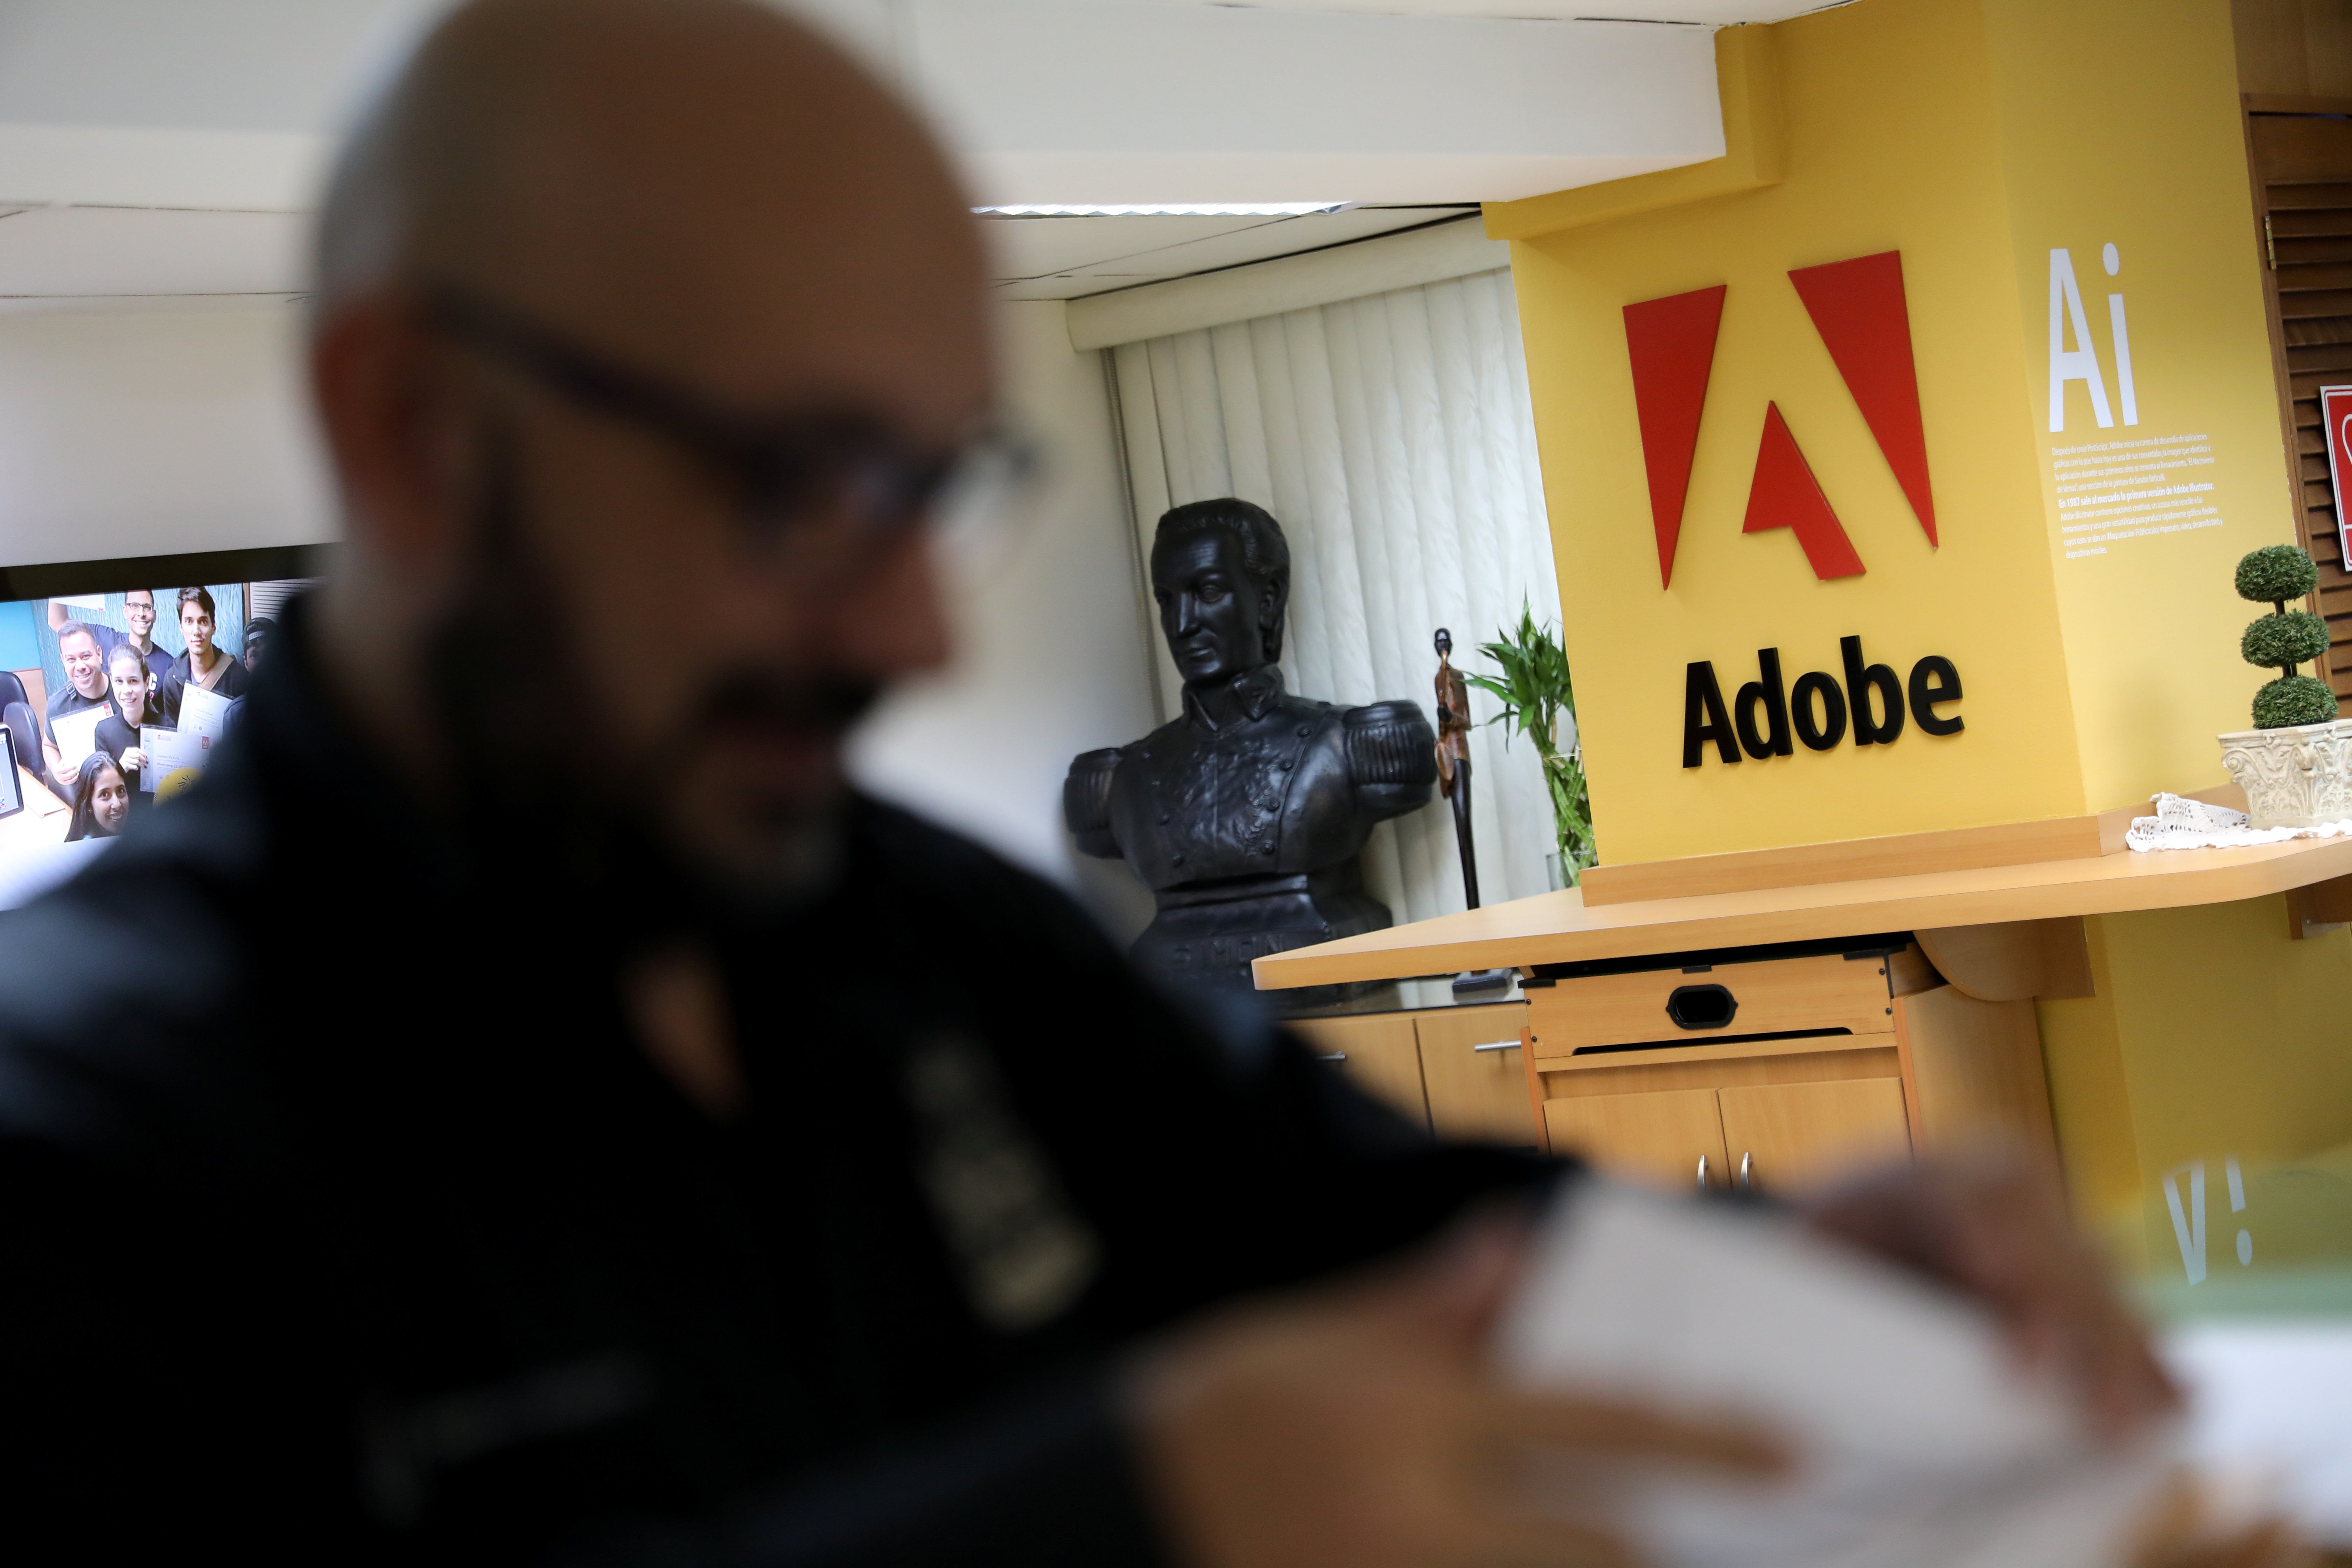 The corporate logo of software company Adobe is on display at the Posa Studio school in Caracas